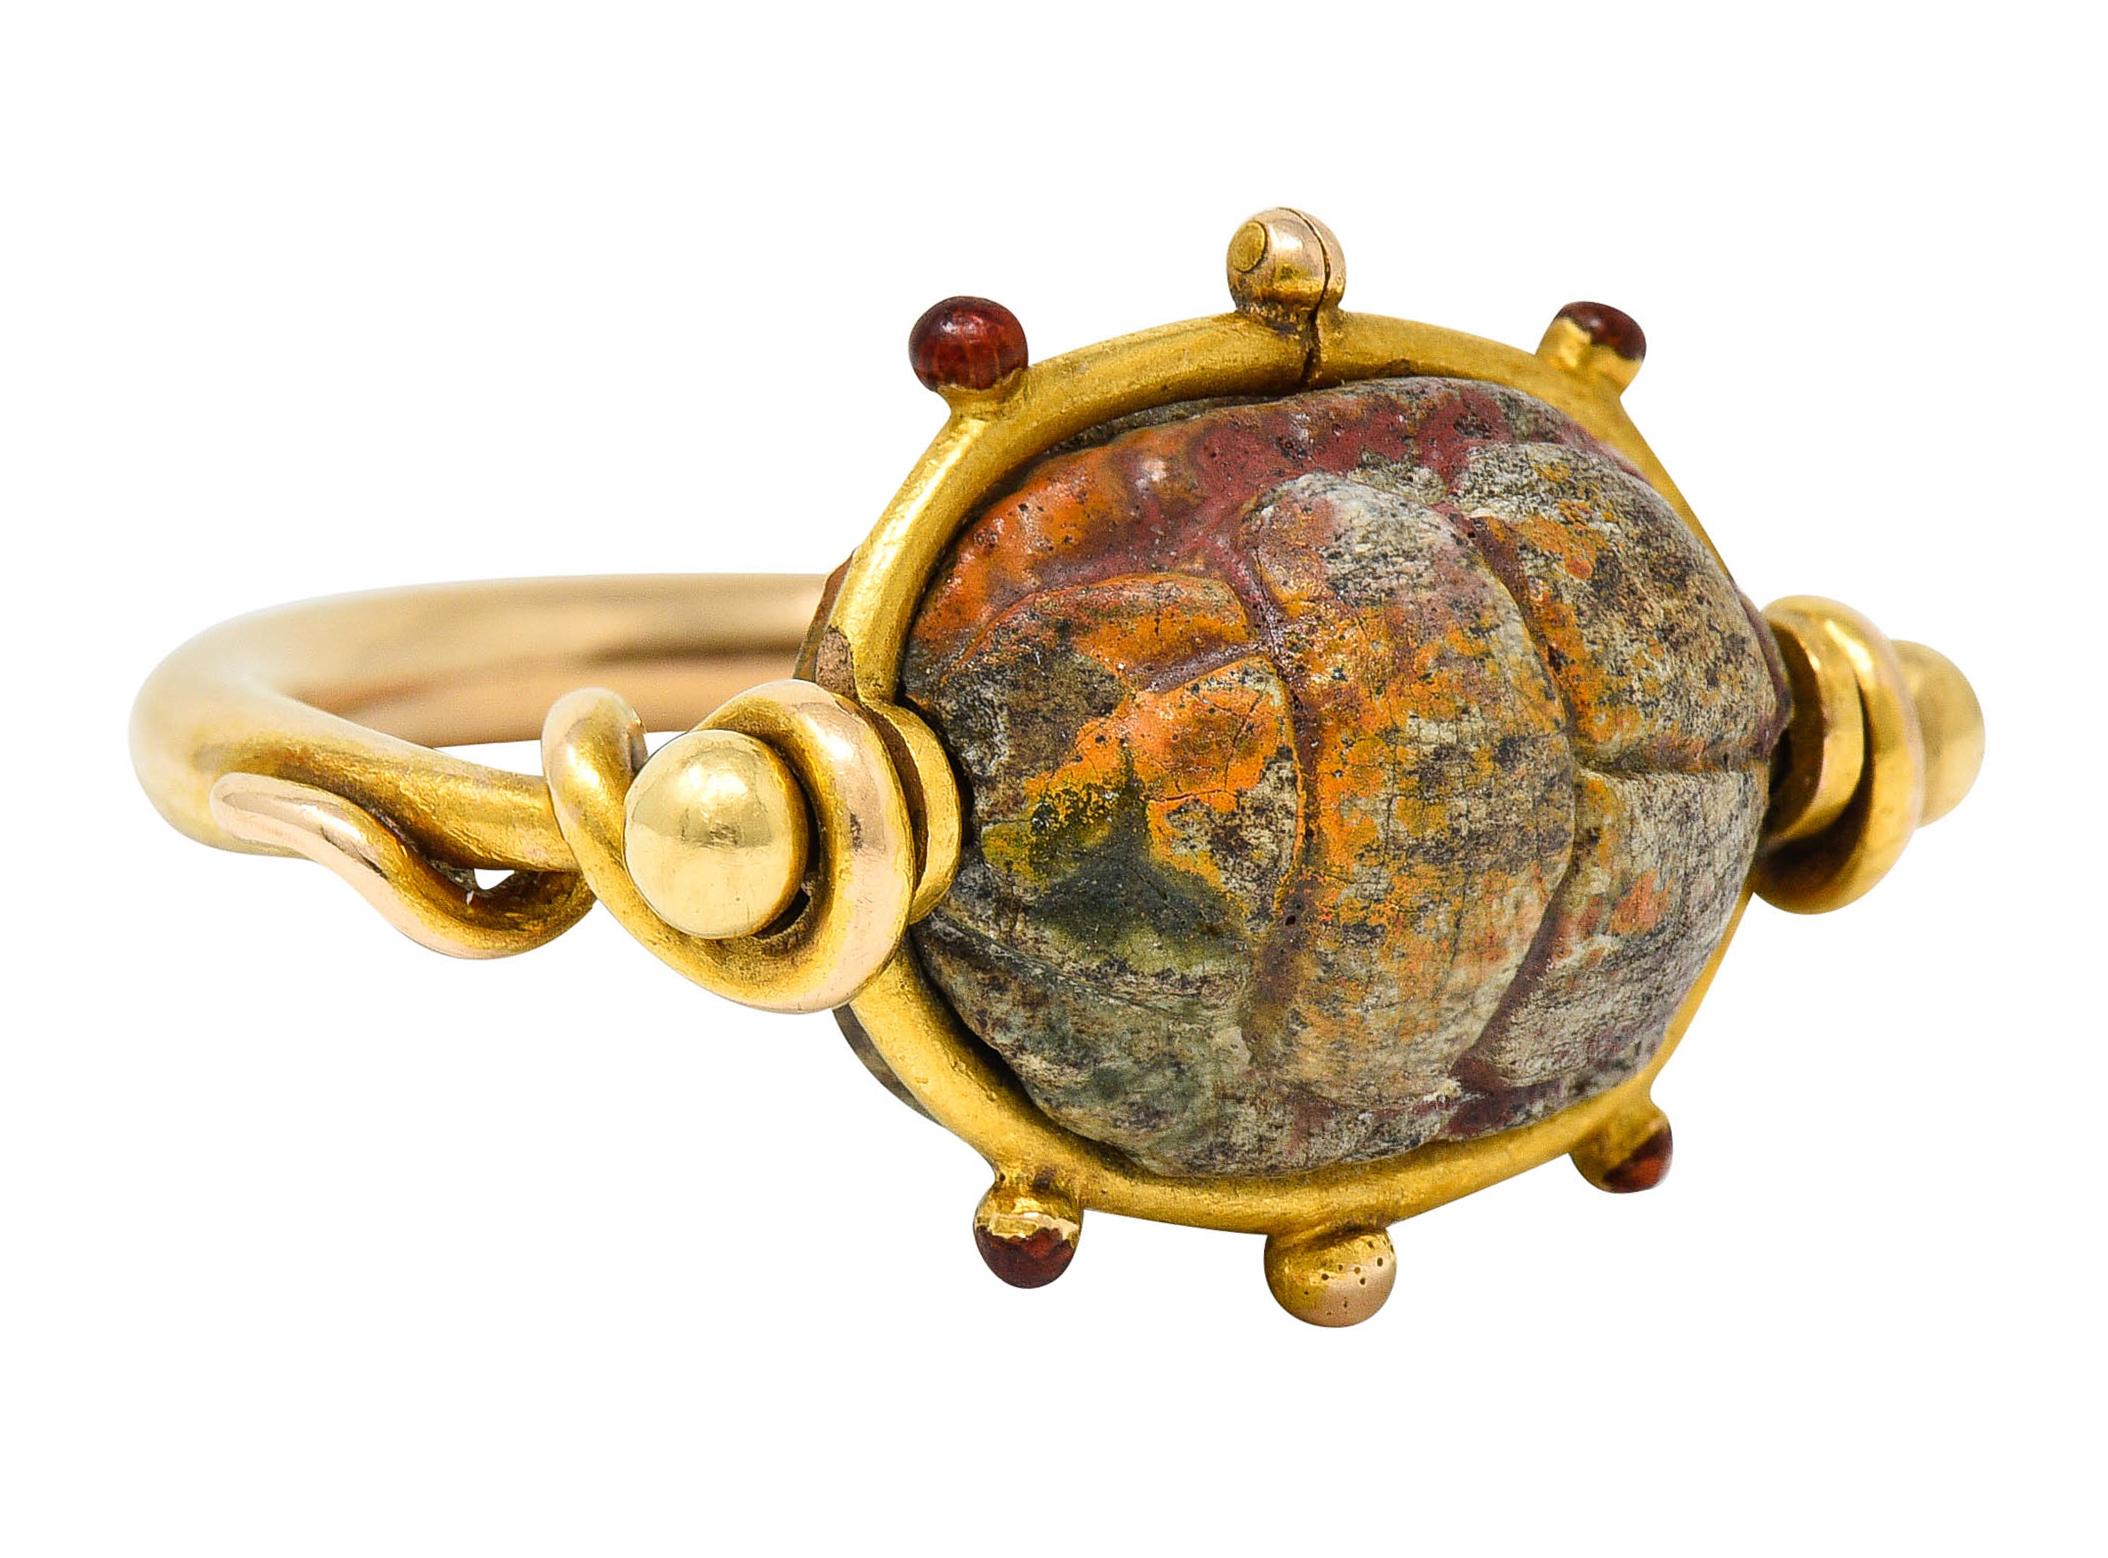 Handwrought ring centering an oval hardstone cabochon

Deeply carved to depict a scarab motif while underside depicts hieroglyphics

Opaque bluish green with remnants of yellow and red faience

With a gold surround accented by gold beading - with